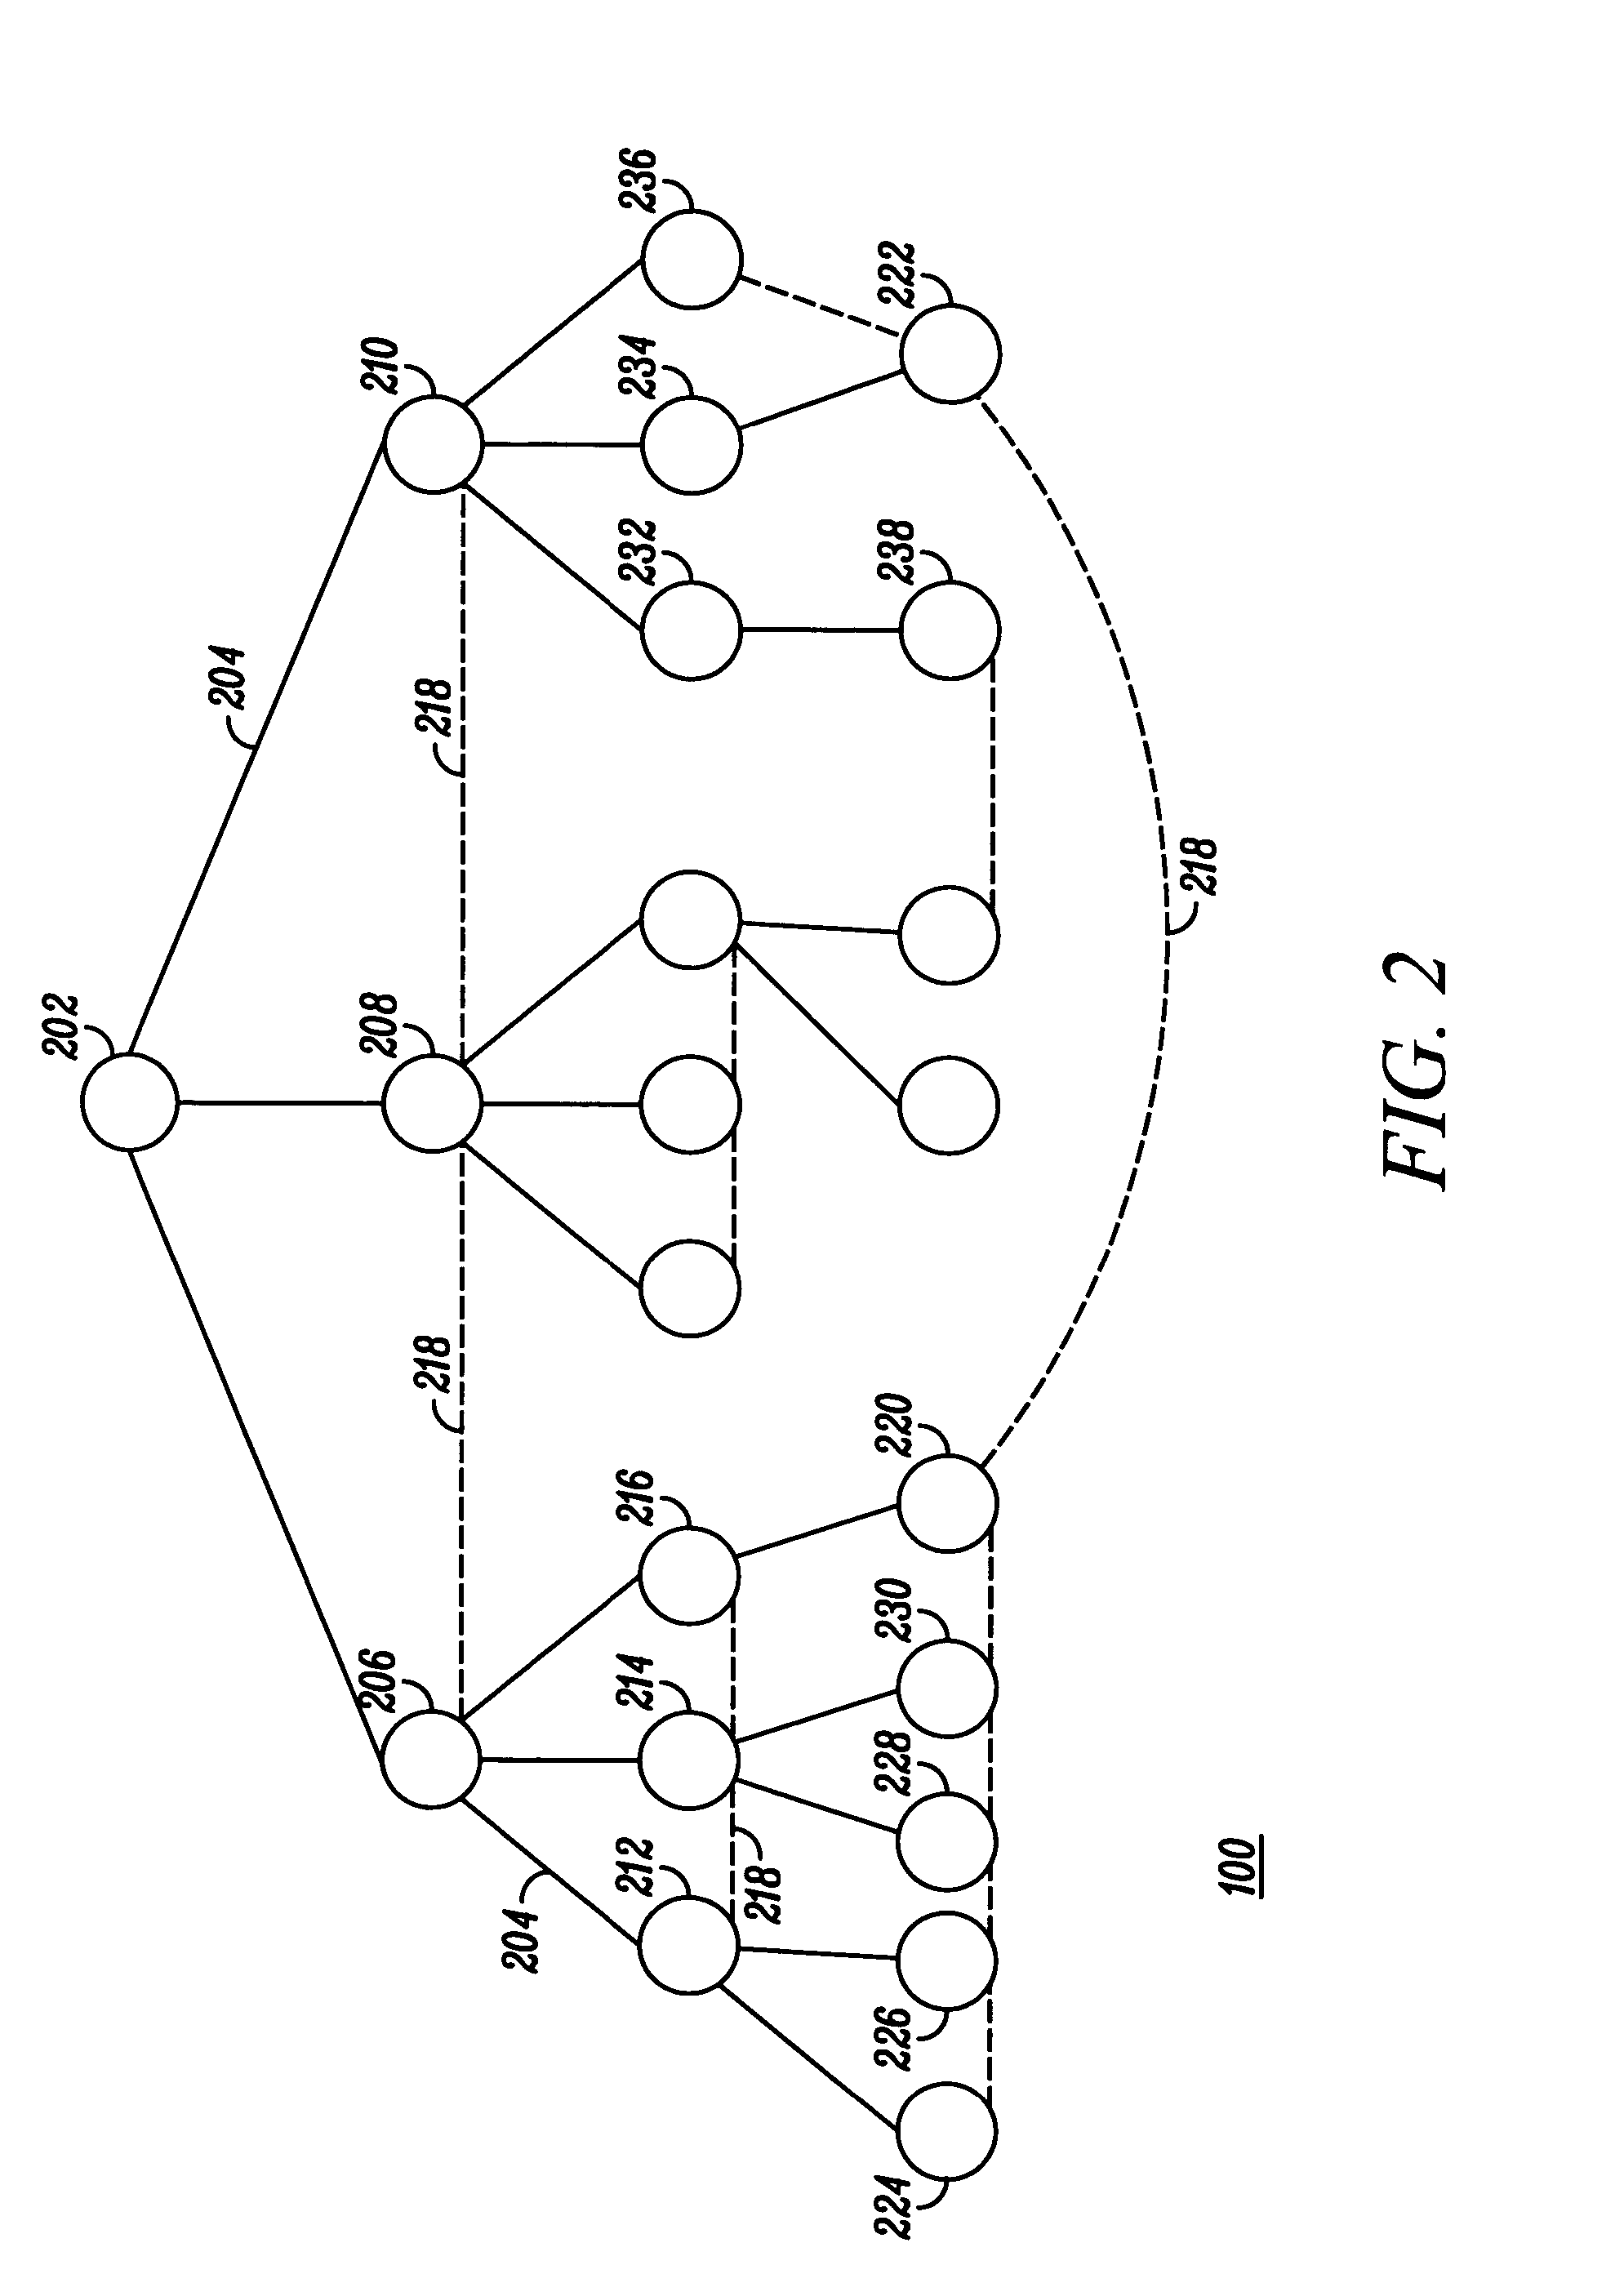 Method and system for data transmission in a wireless network